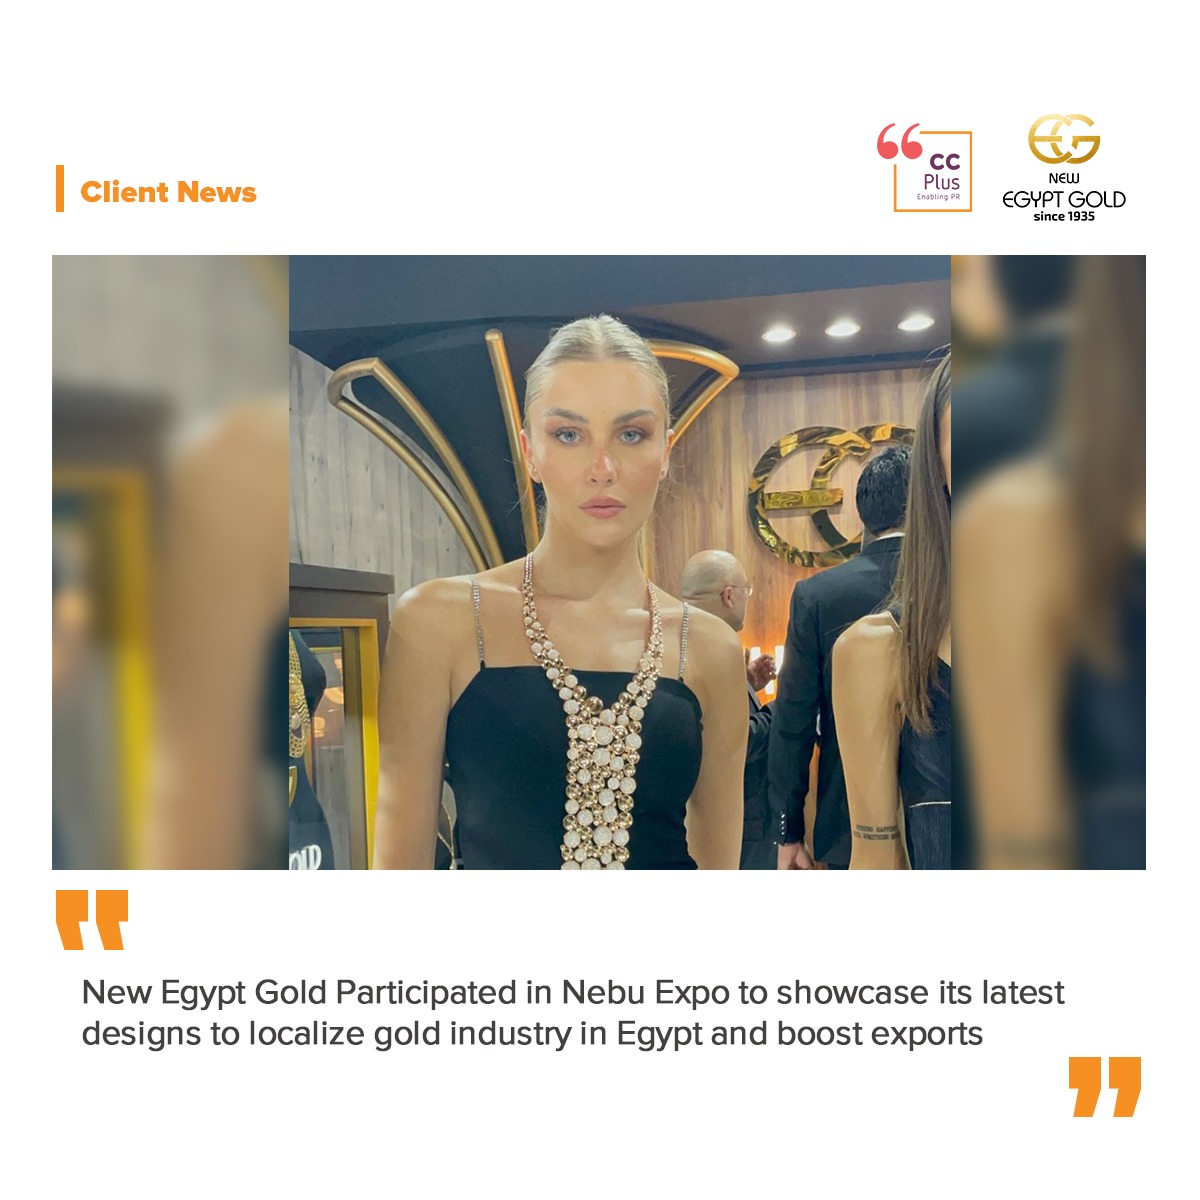 New Egypt Gold participated in Nebu Expo to showcase its latest designs to localize gold industry in Egypt and boost exports.